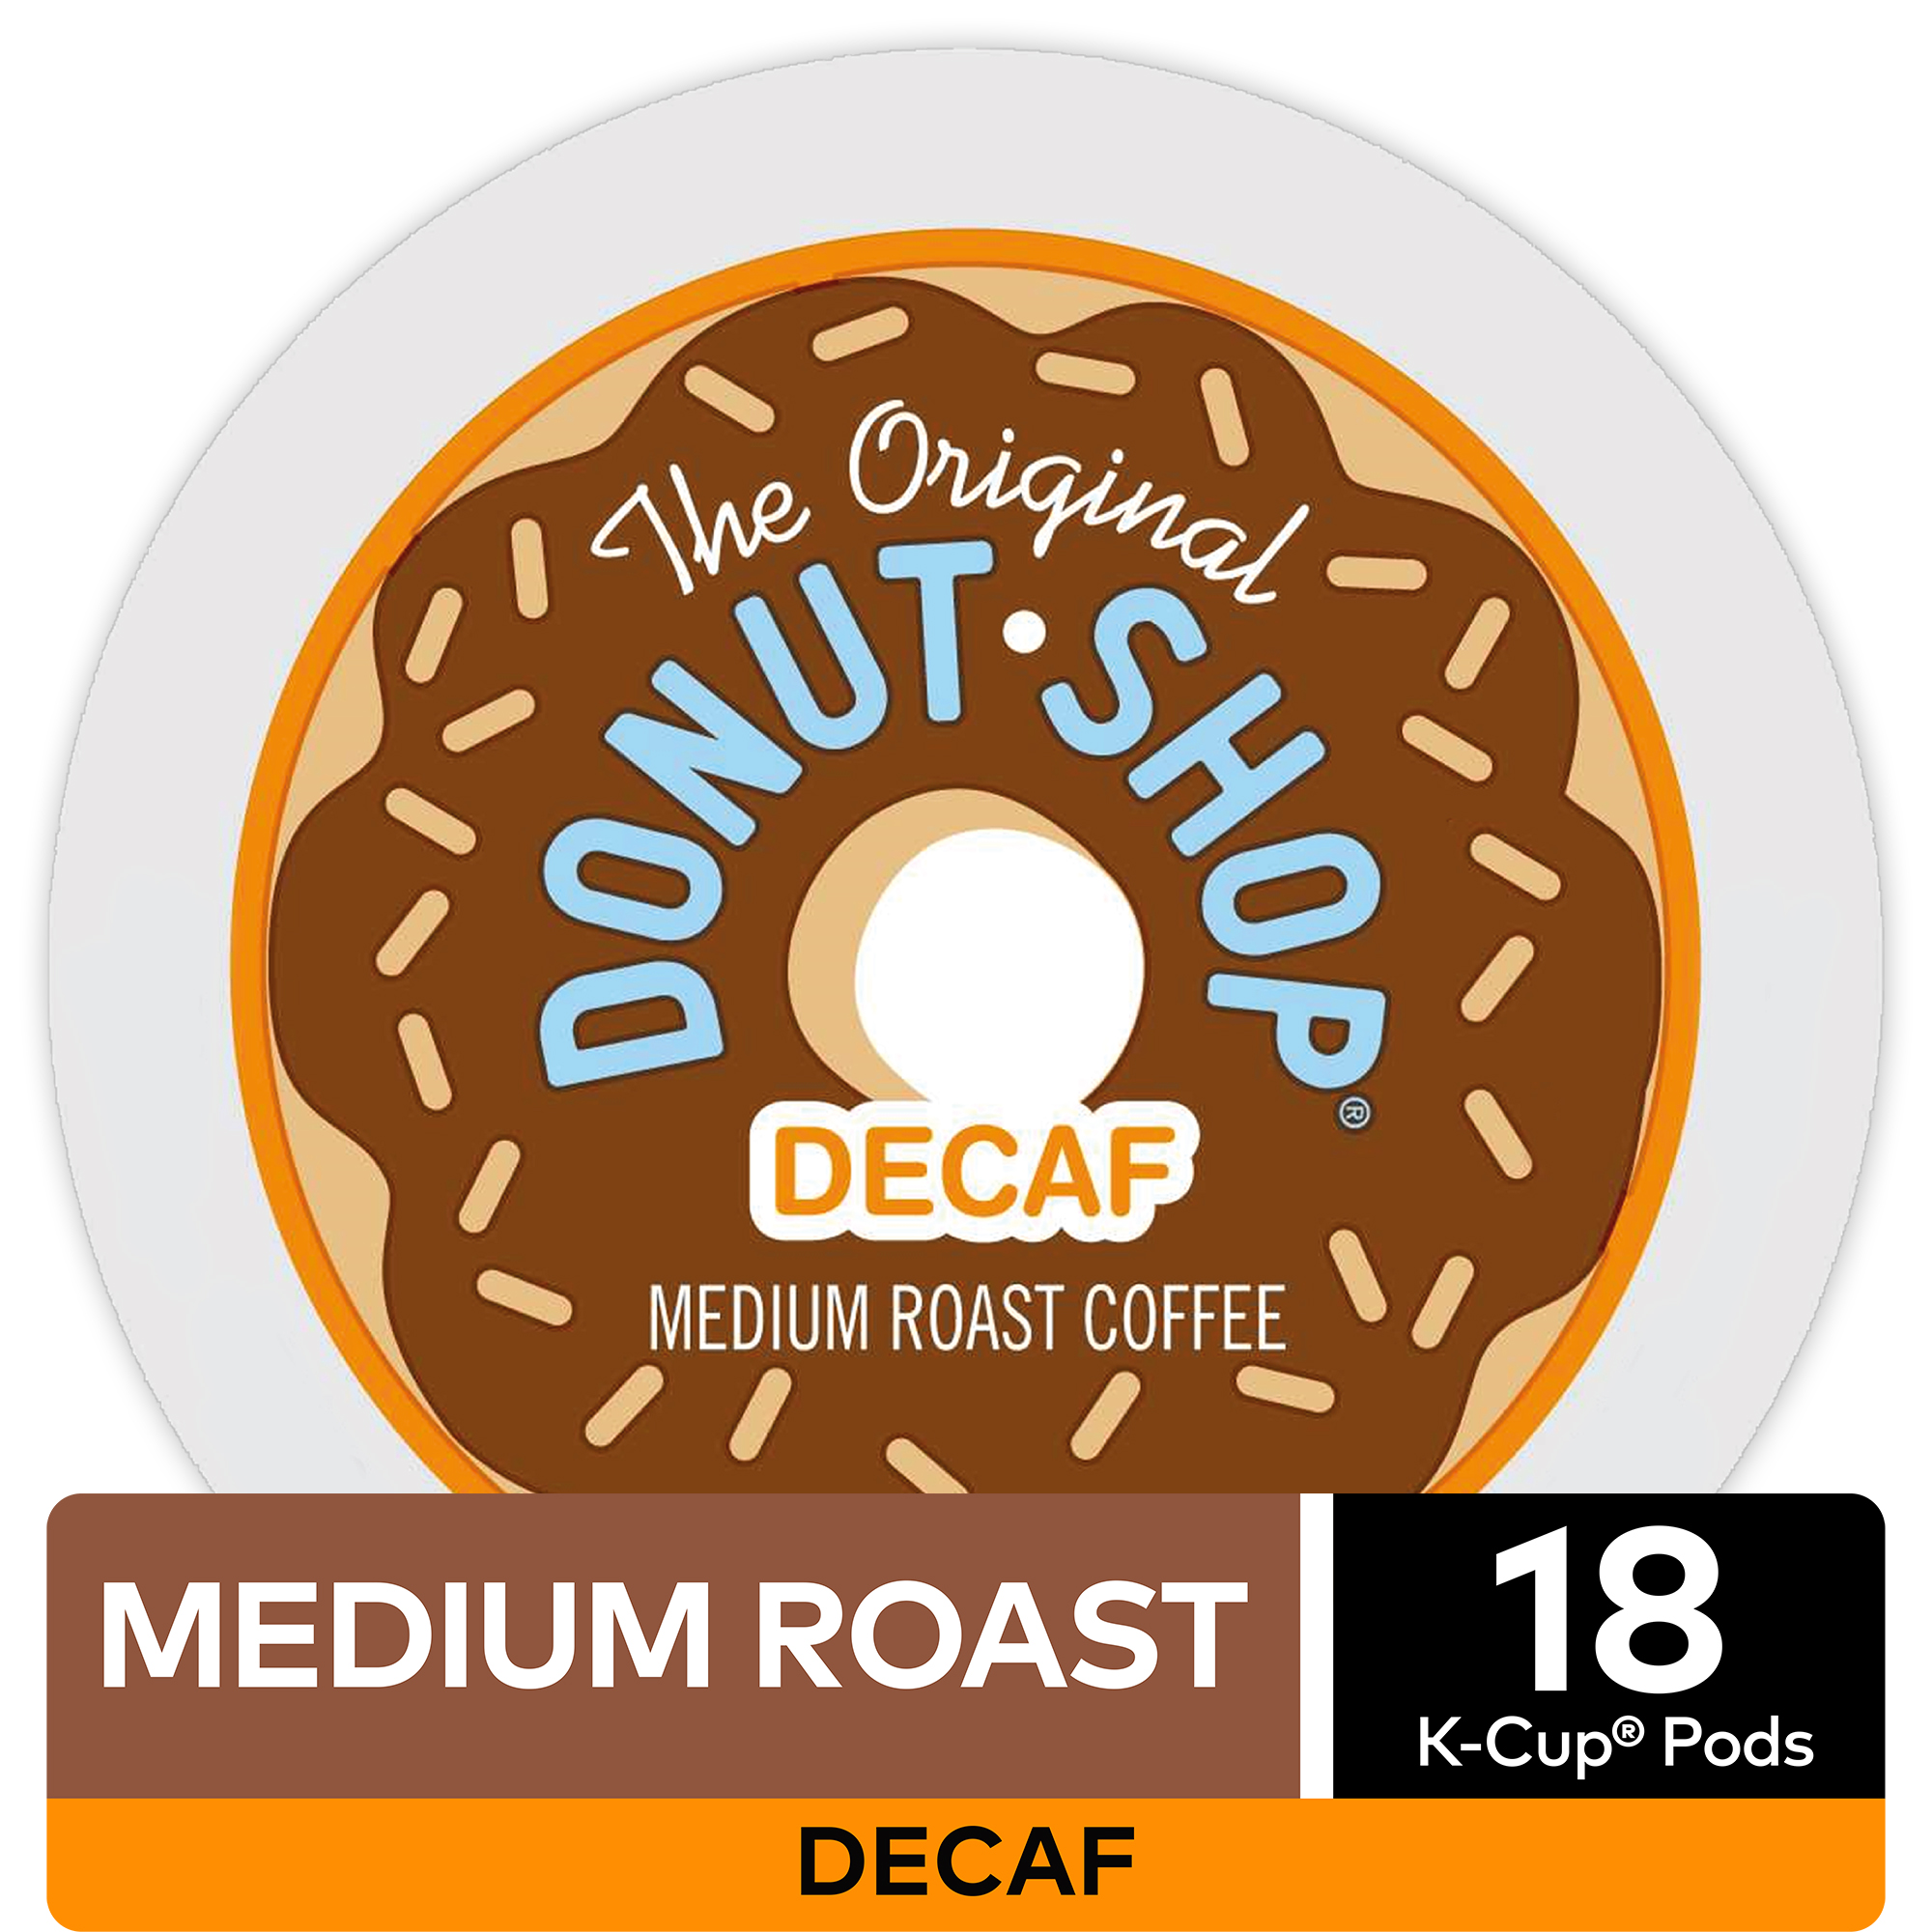 The Original Donut Shop Decaf K-Cup Coffee Pods, Medium Roast, 18 Count for Keurig Brewers - image 2 of 11